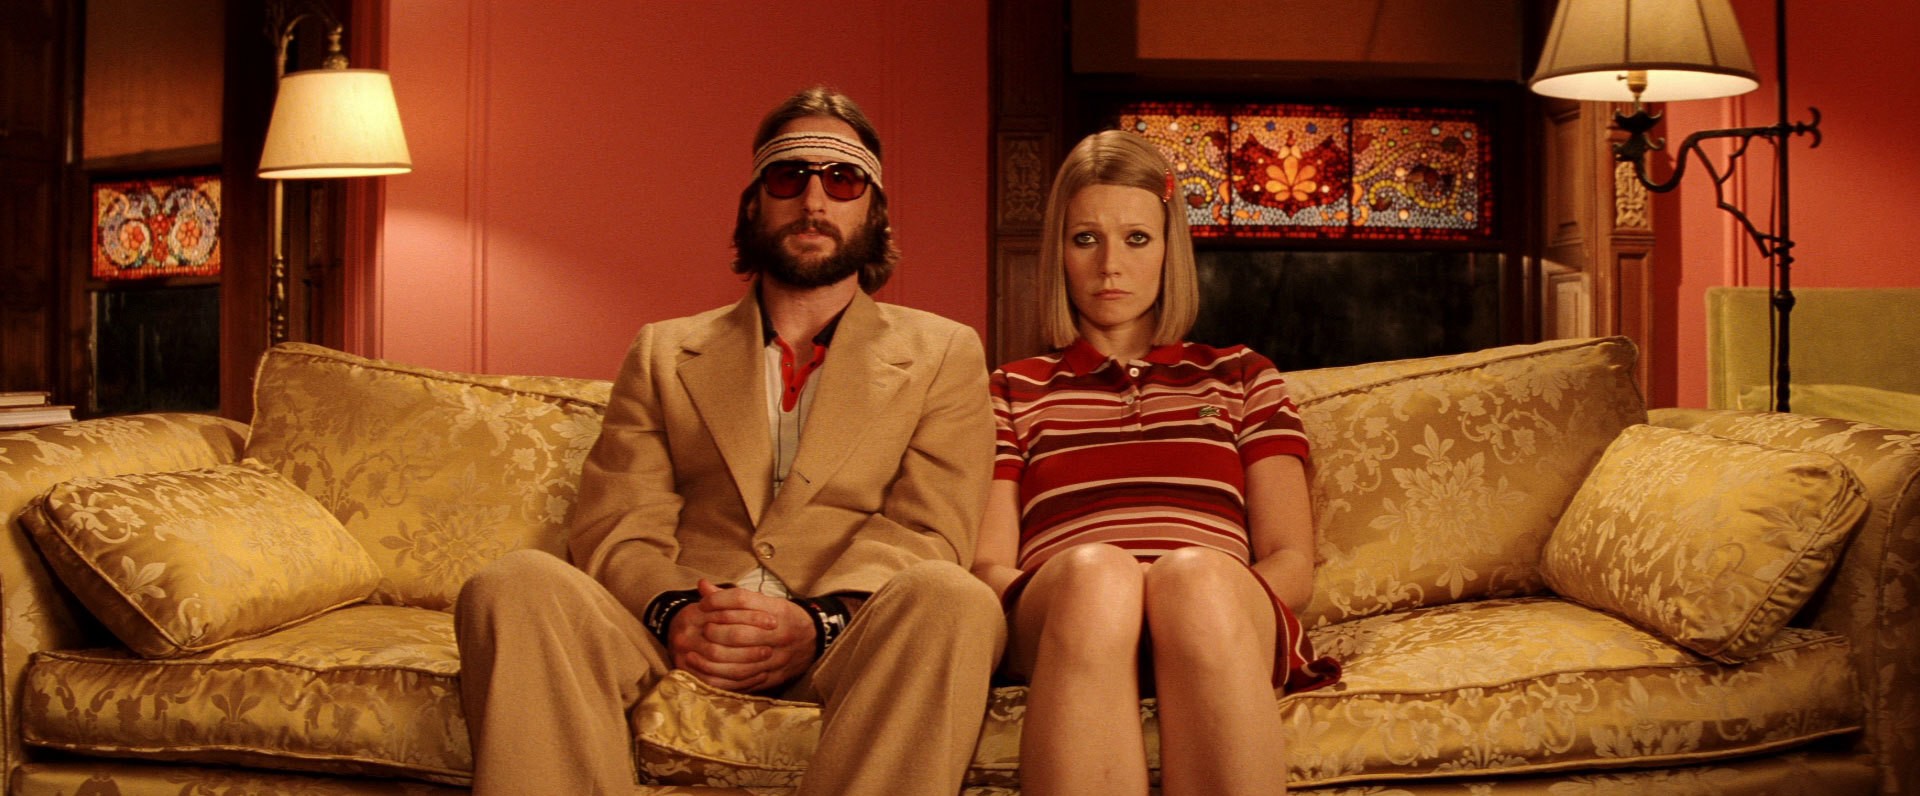 Fashionable looks inspired by Wes Anderson movie characters